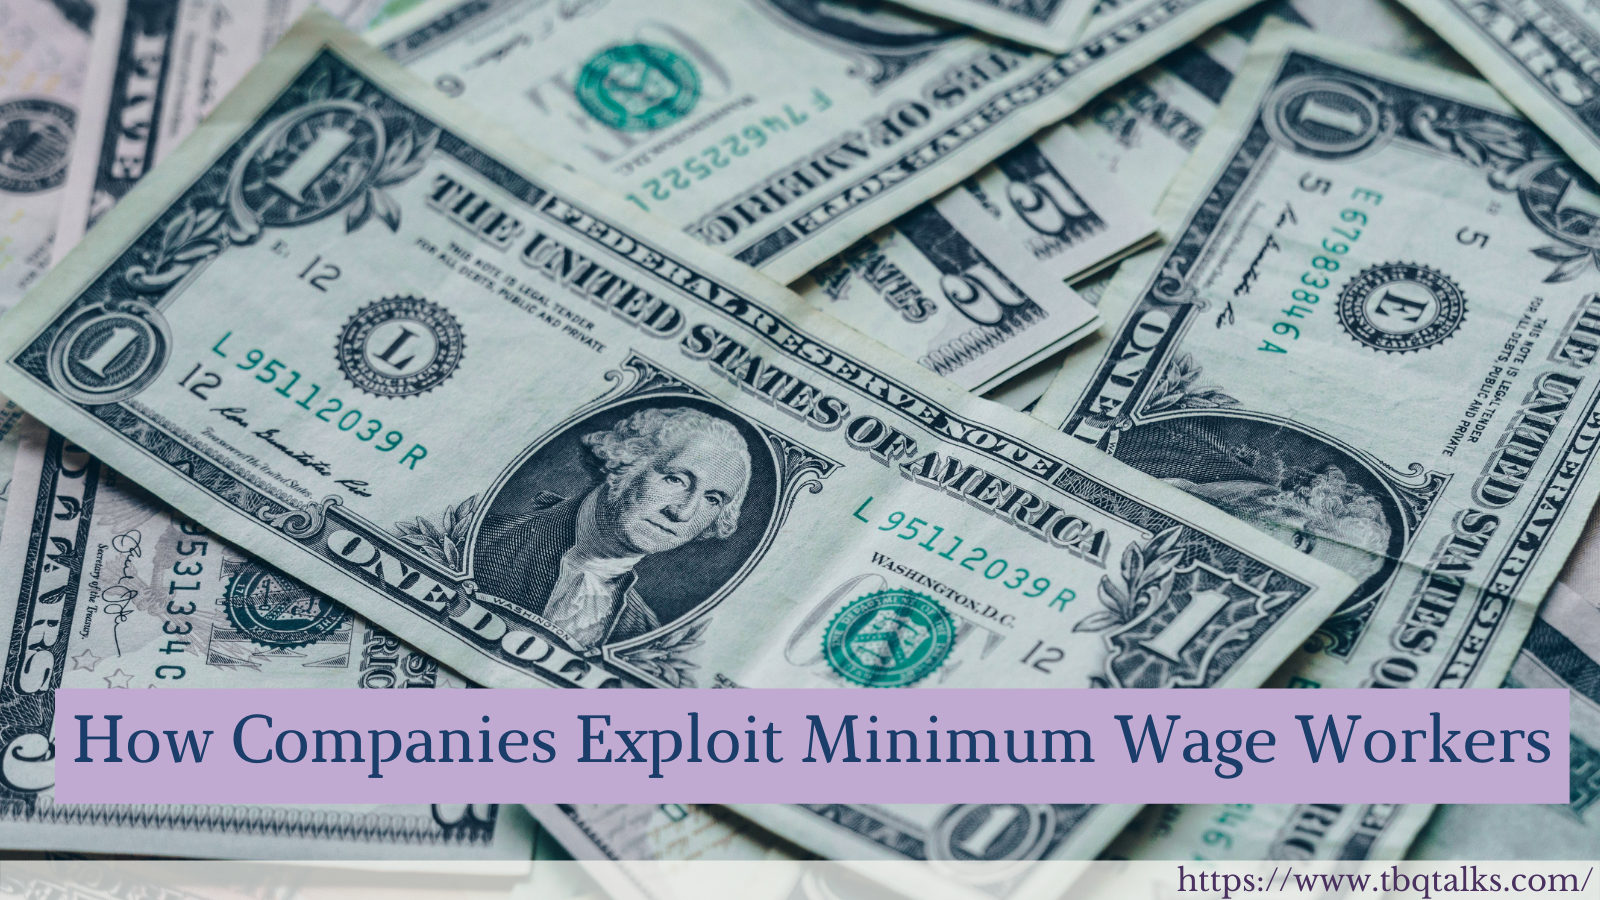 How Companies Exploit Minimum Wage Workers